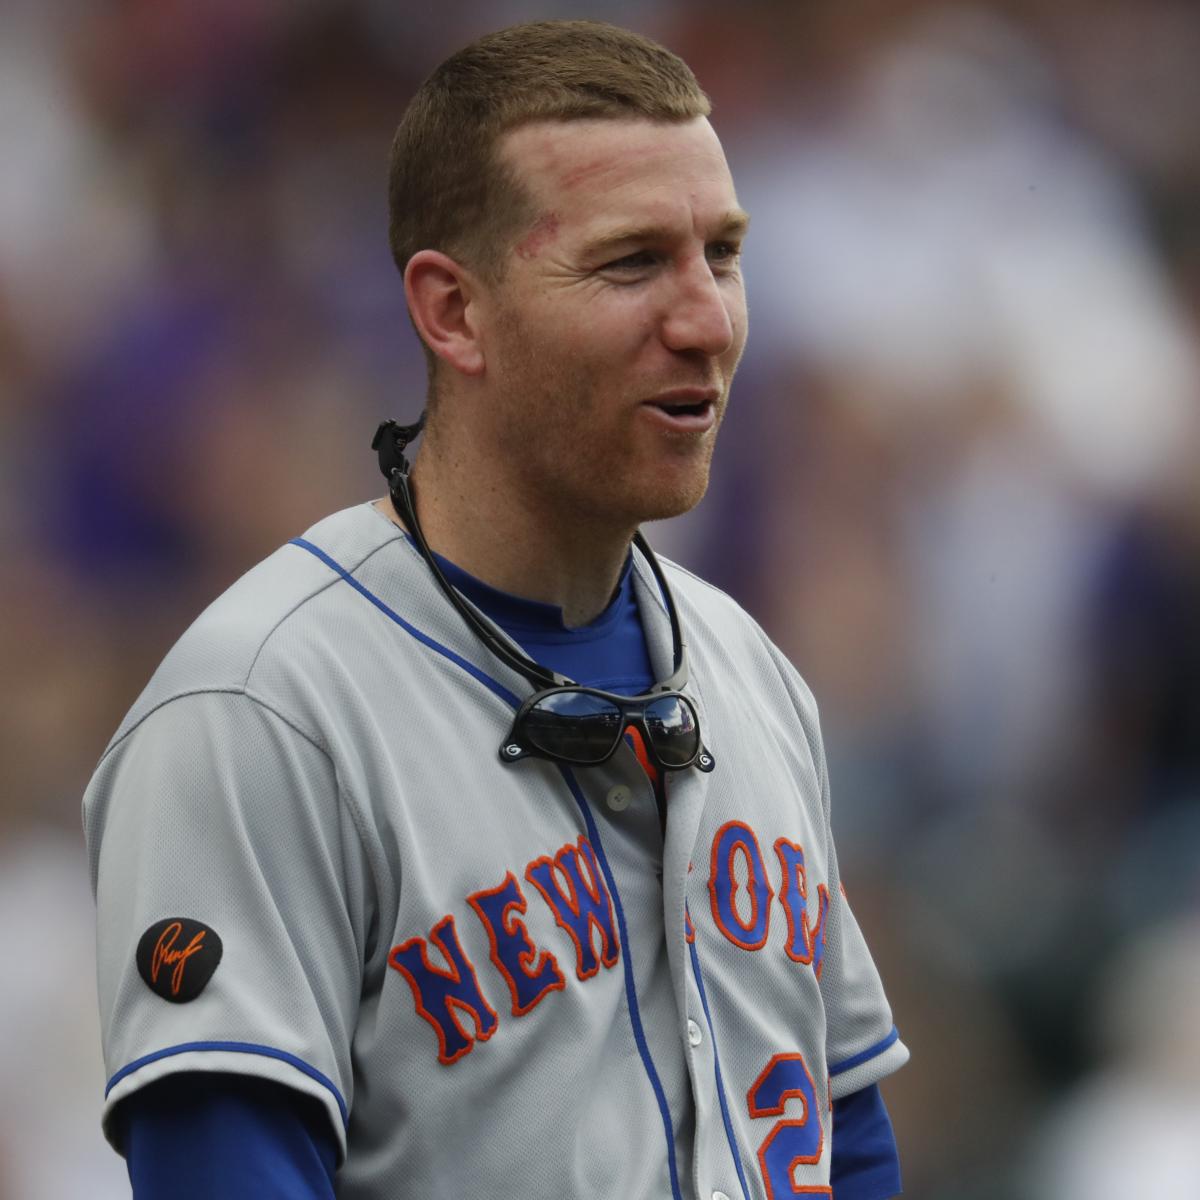 Todd Frazier catches first pitch from Mayor Hill to kick off 2023